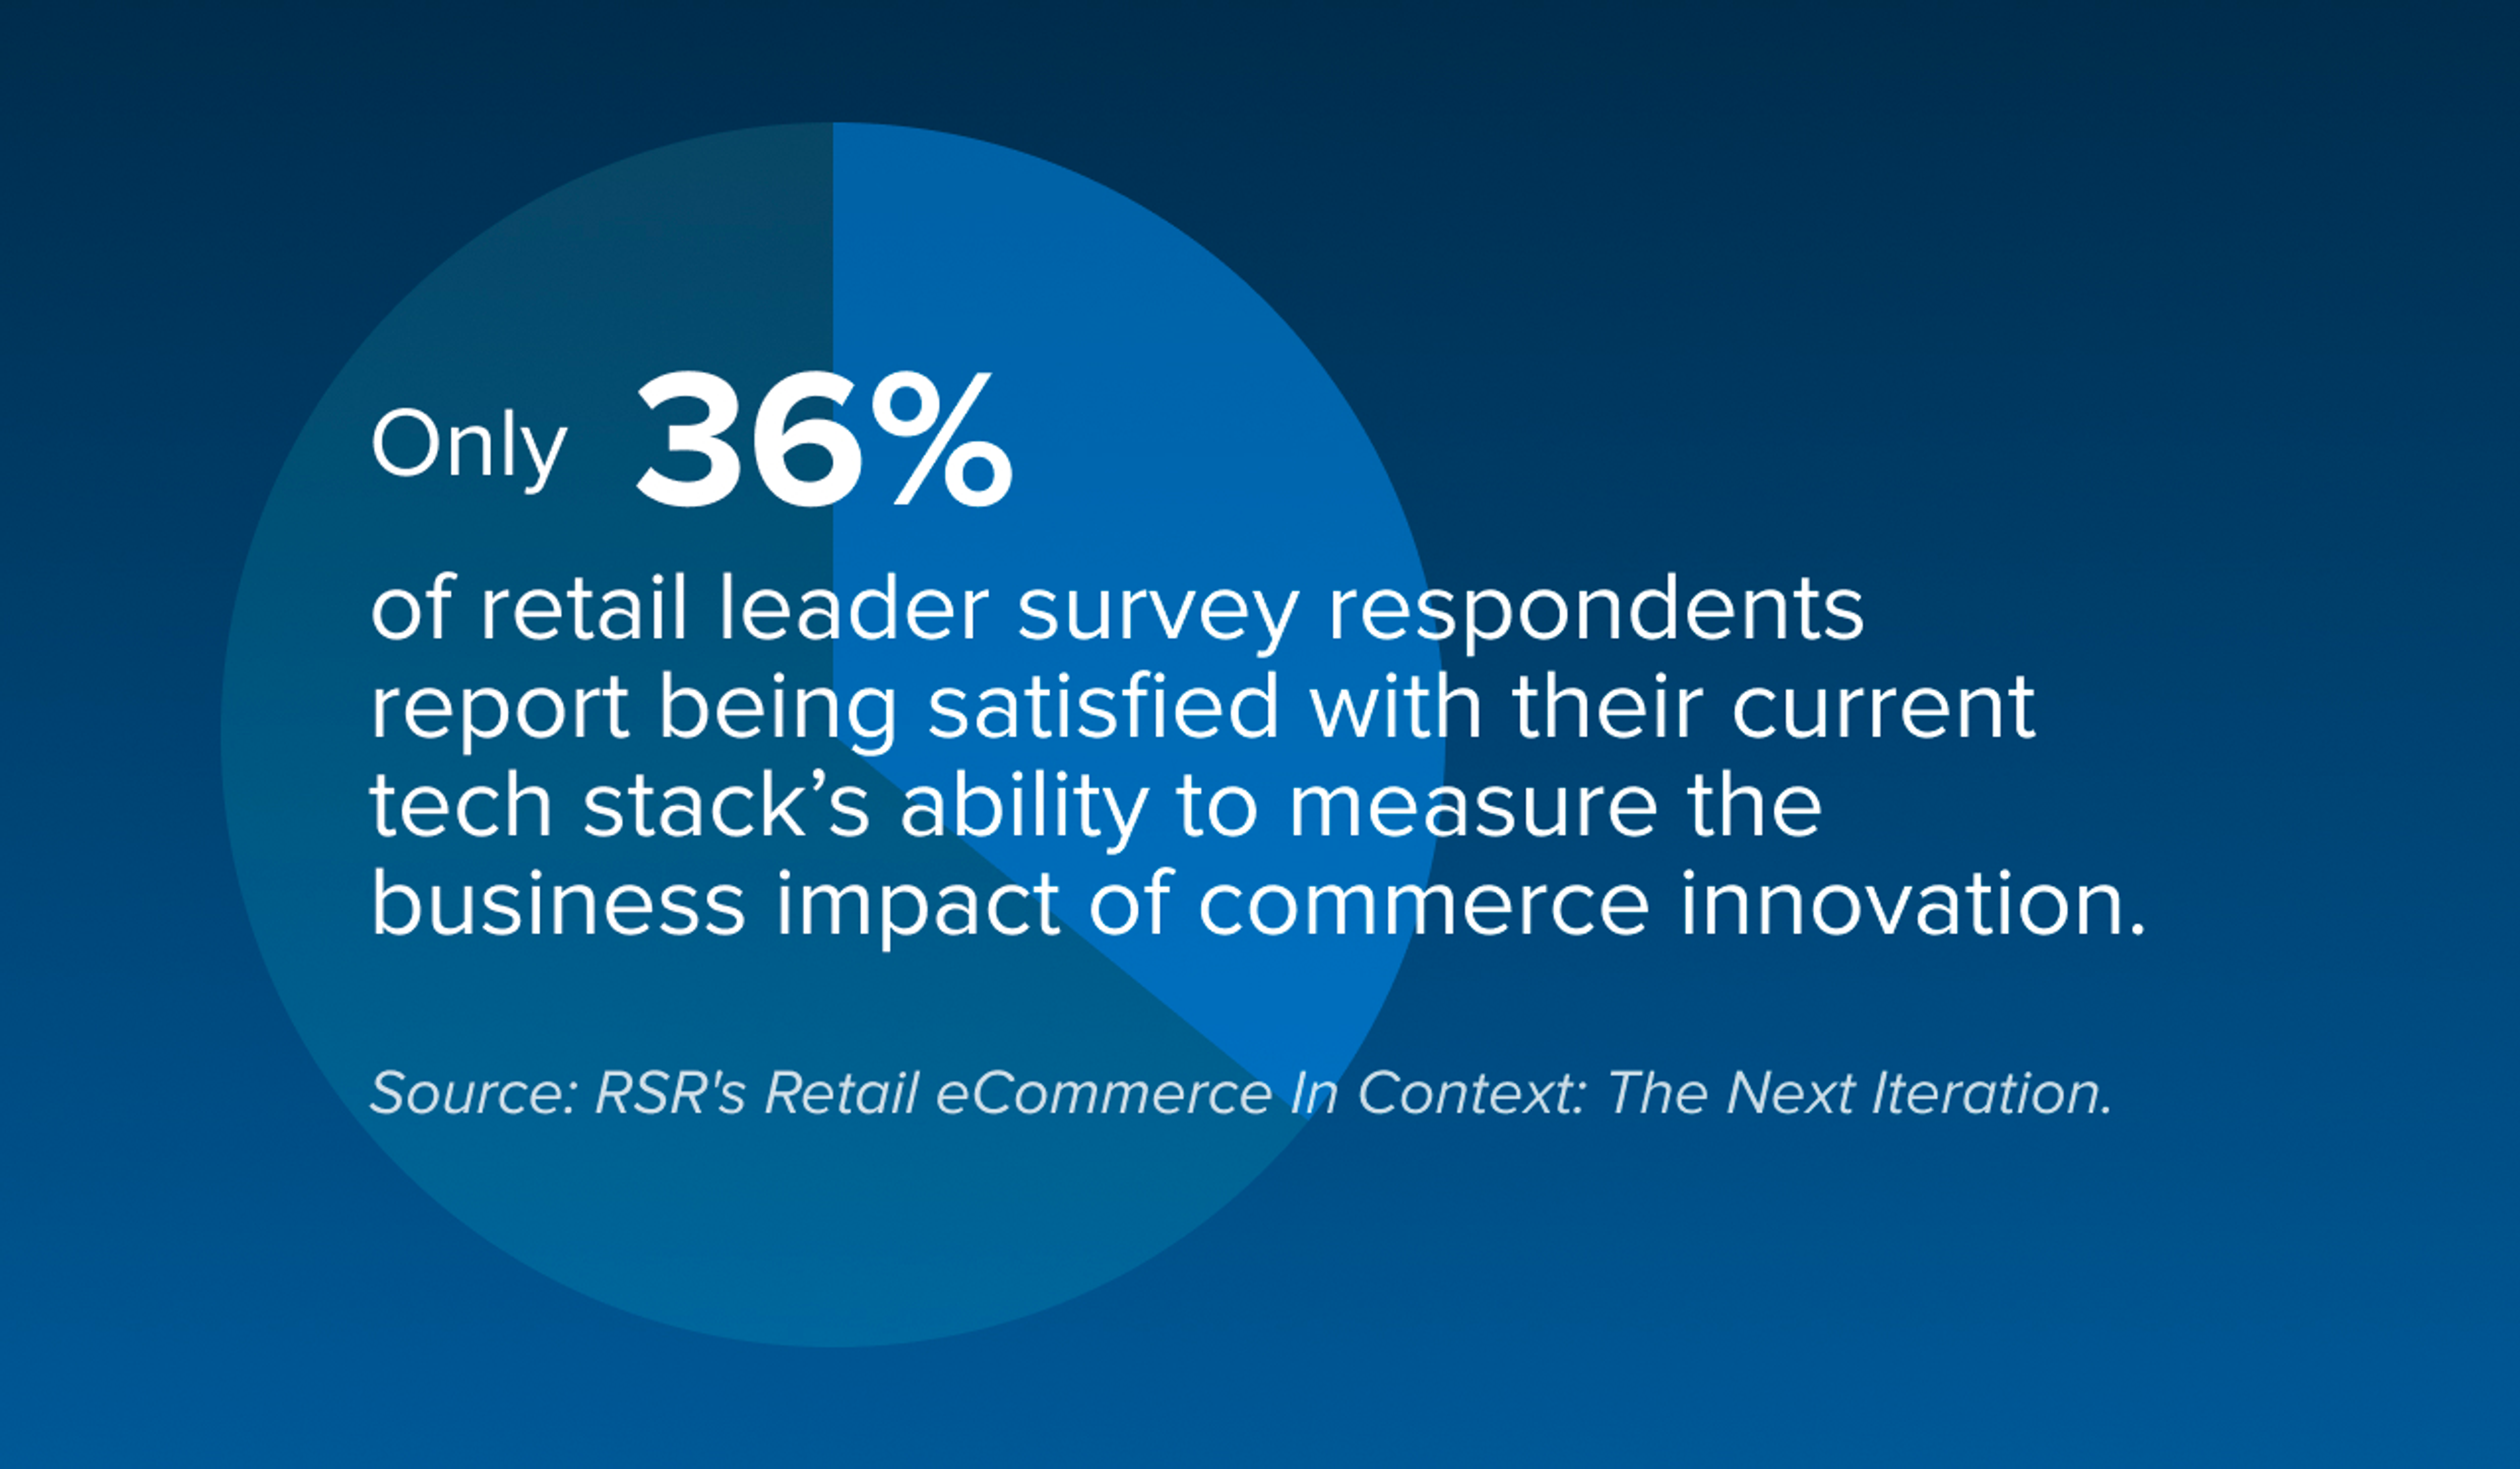 36% of retail leaders report being satisfied with their current tech stack